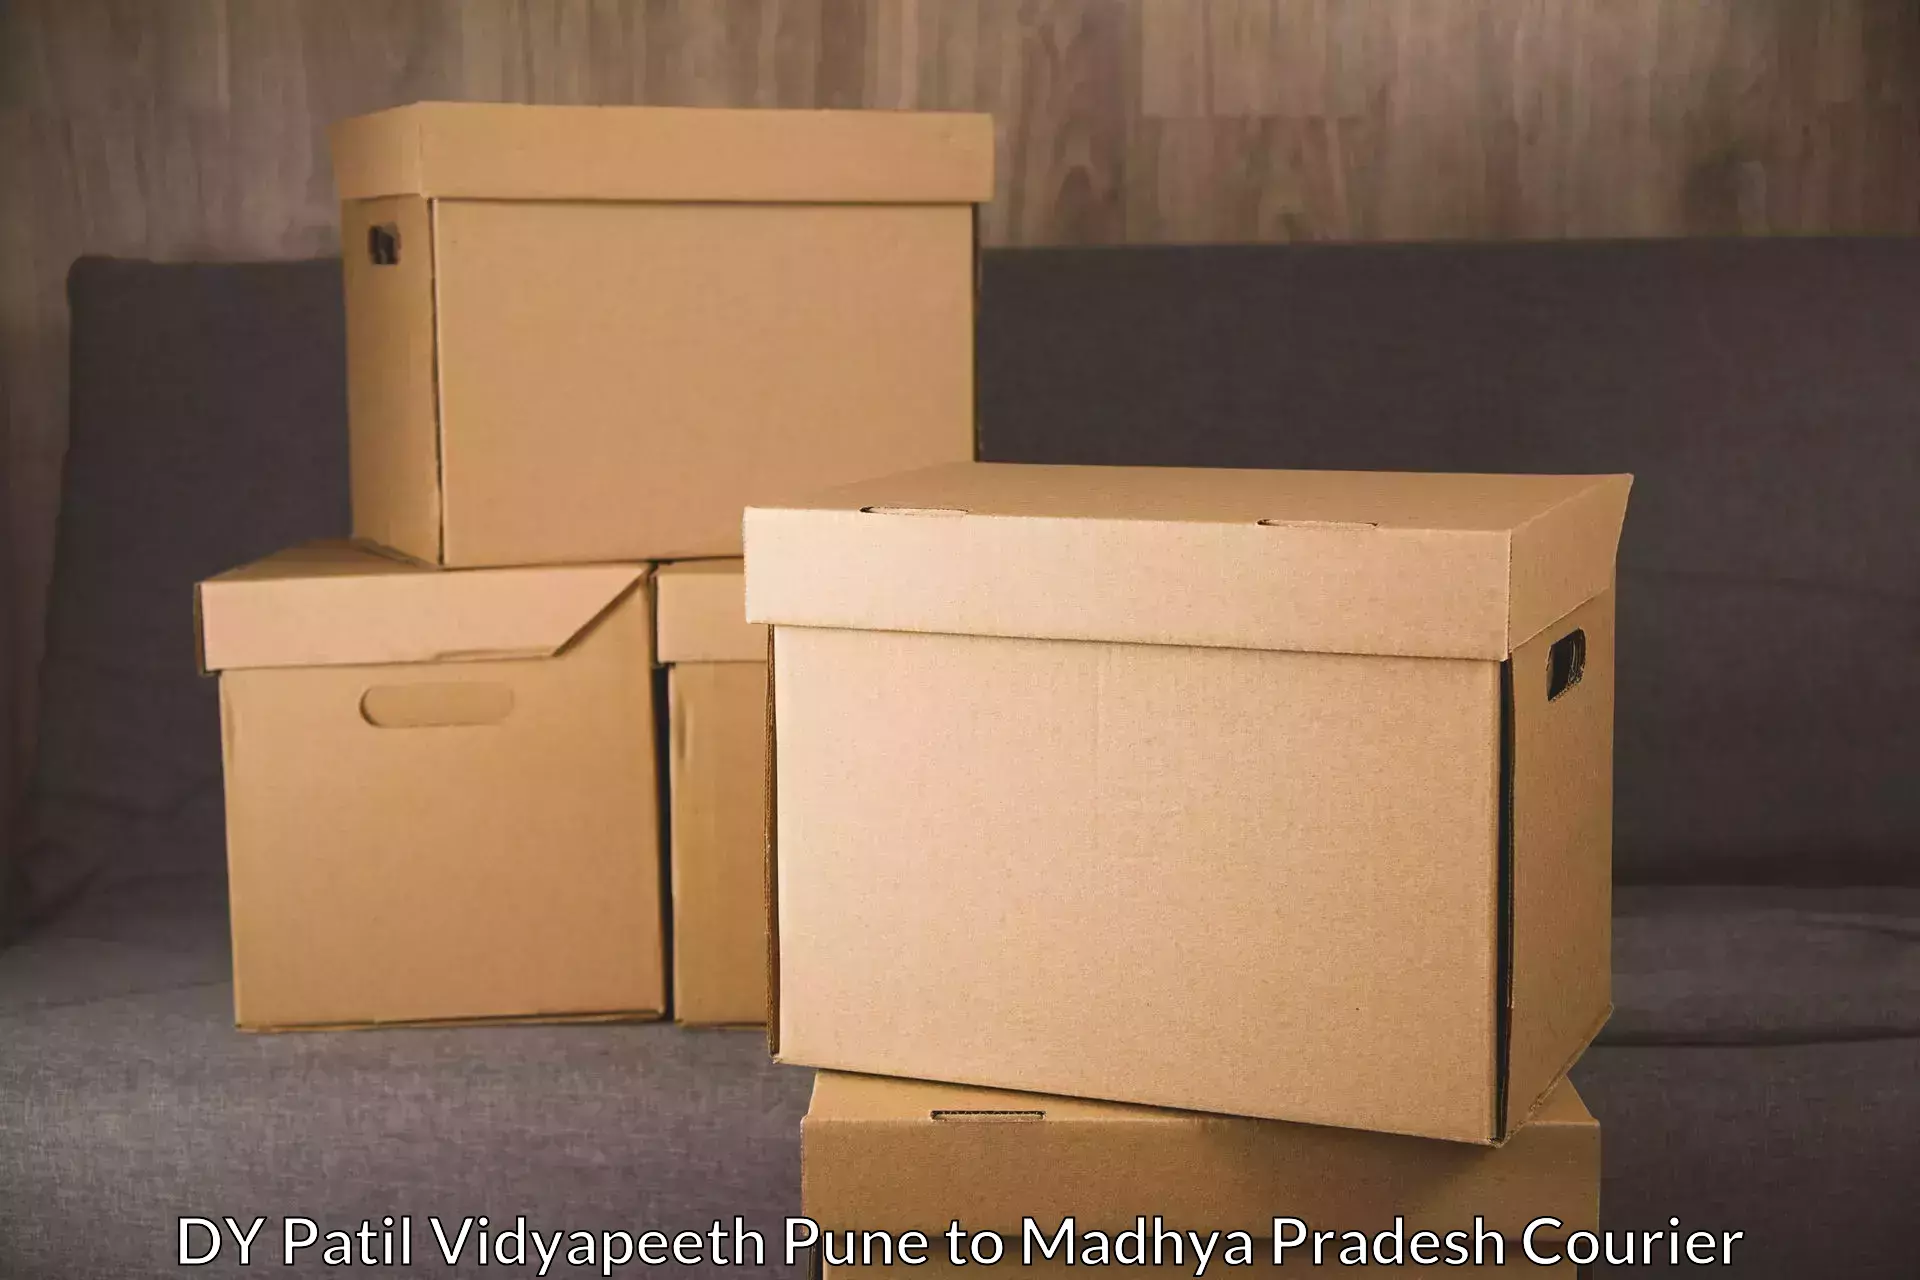 Fast shipping solutions DY Patil Vidyapeeth Pune to Deosar